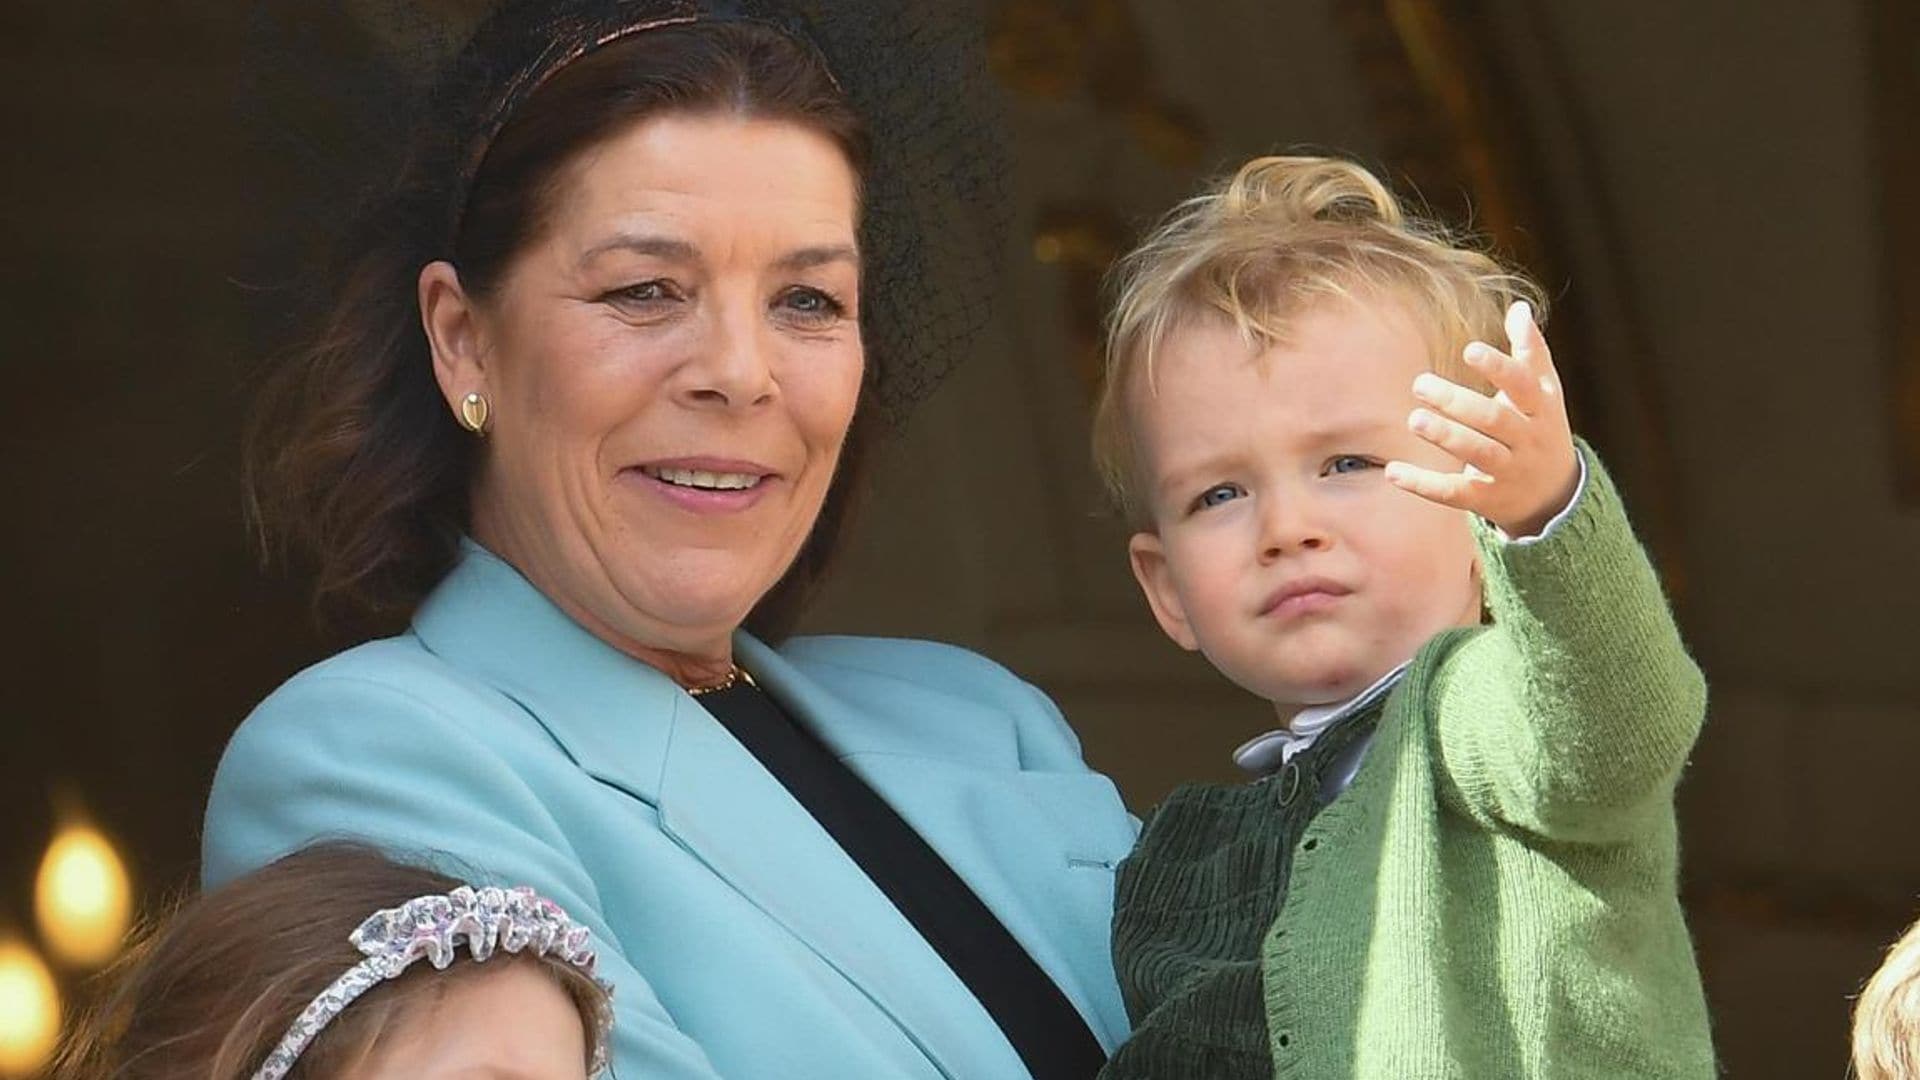 Princess Caroline is the ultimate active grandmother hitting the slopes with grandkids